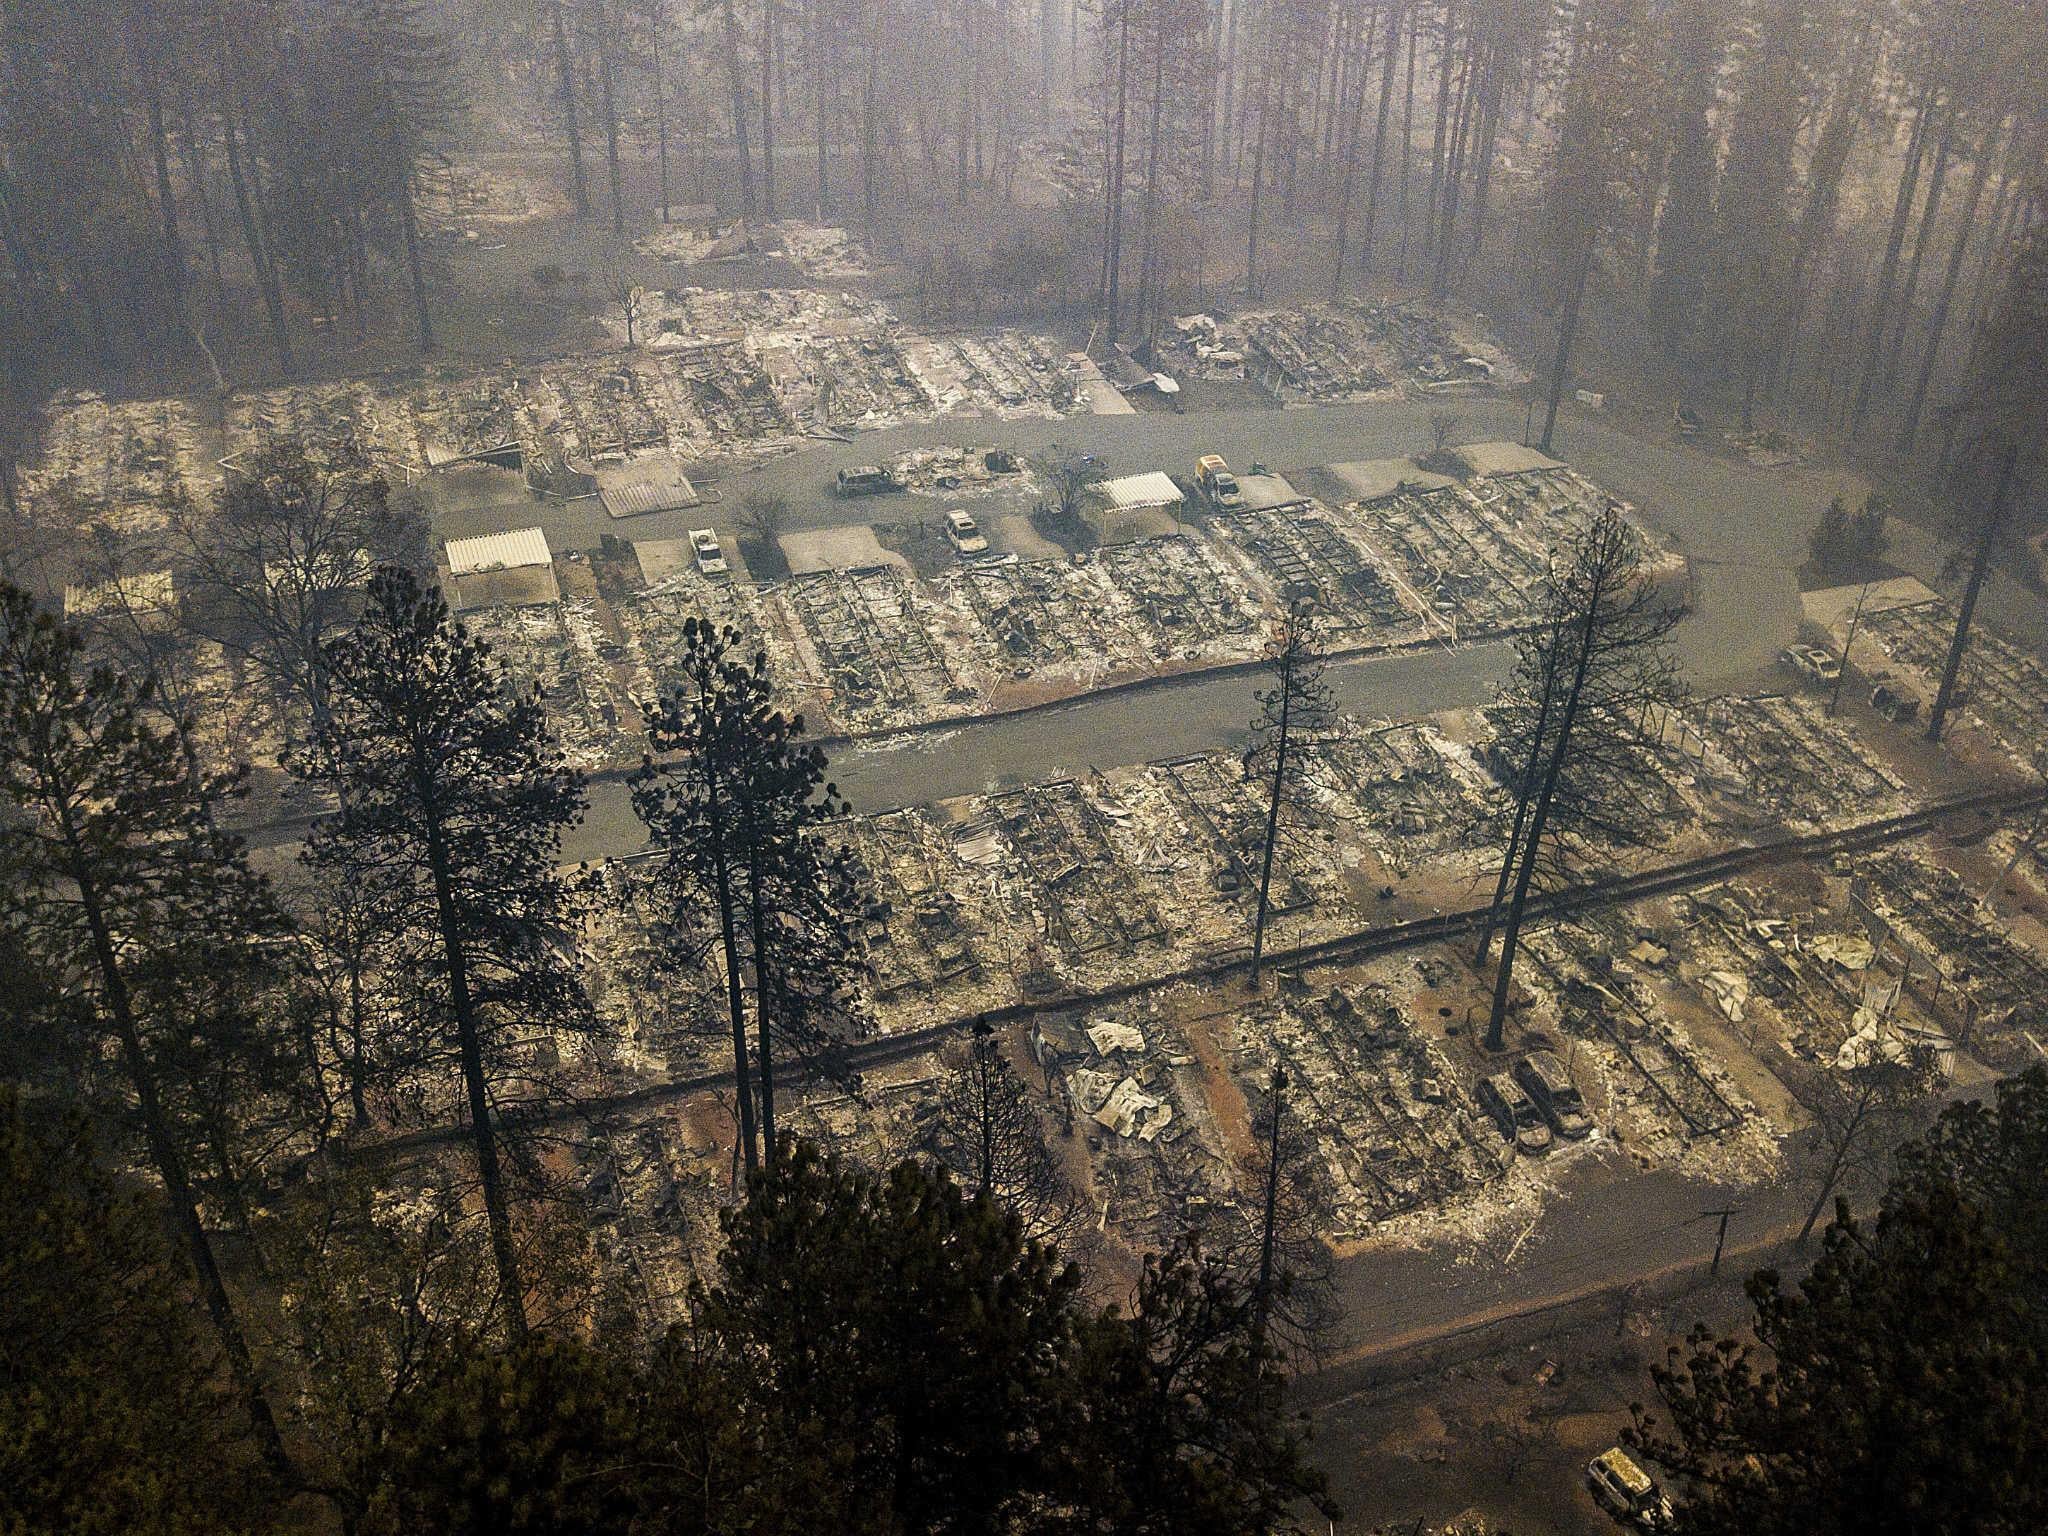 PHOTOS: Then and now: Paradise a year after Camp Fire